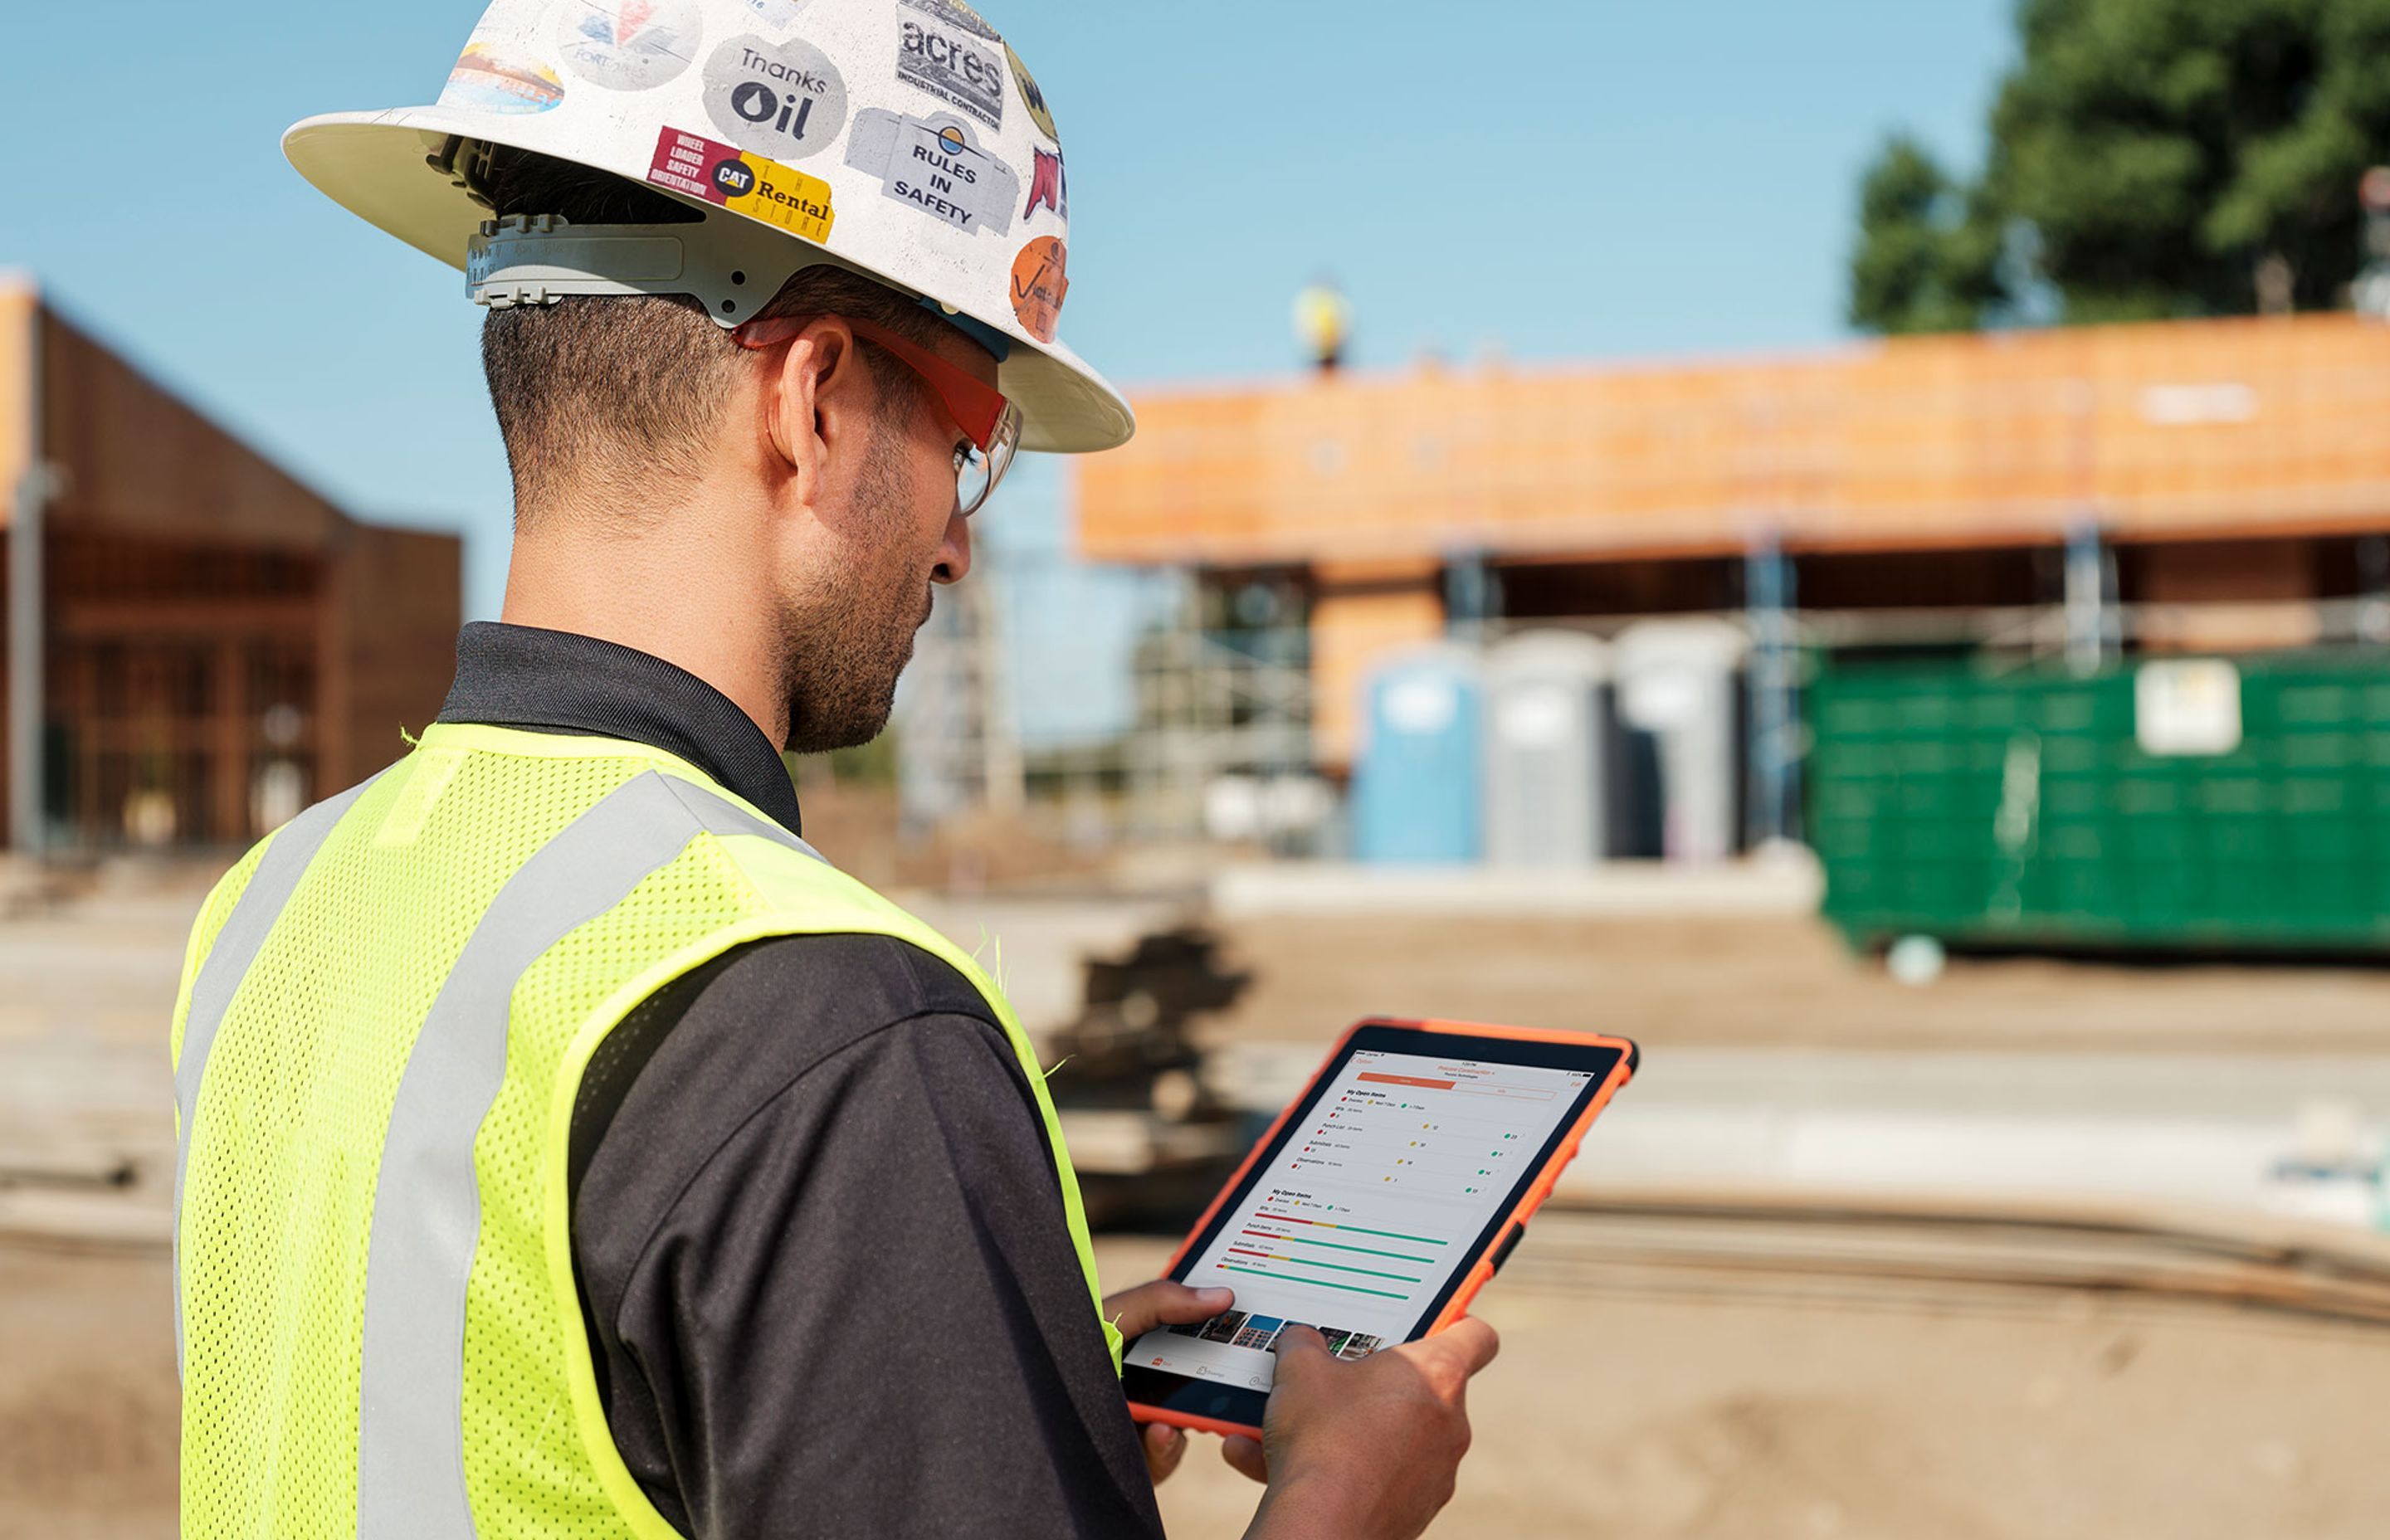 Research has shown that the COVID pandemic may have caused the construction industry to fast track the adoption of digital tools such as virtual collaboration.